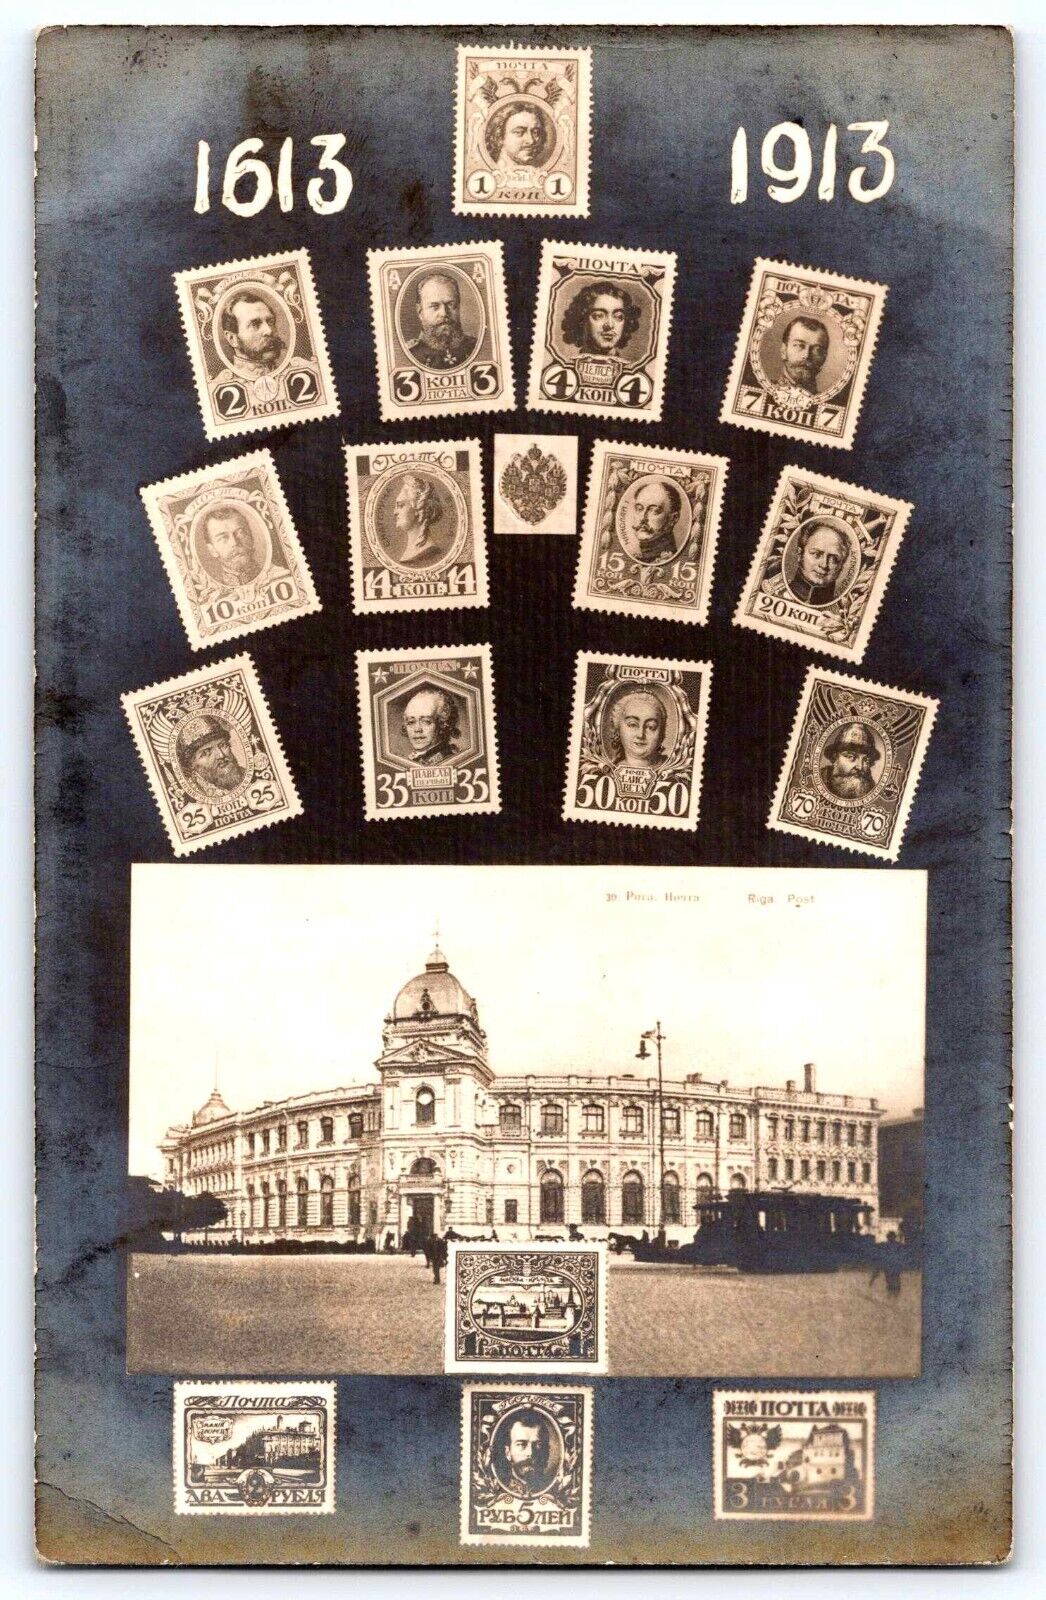 Stamps Russia Riga from 1613-1913 Vintage Postcard c1913 Nicholas II